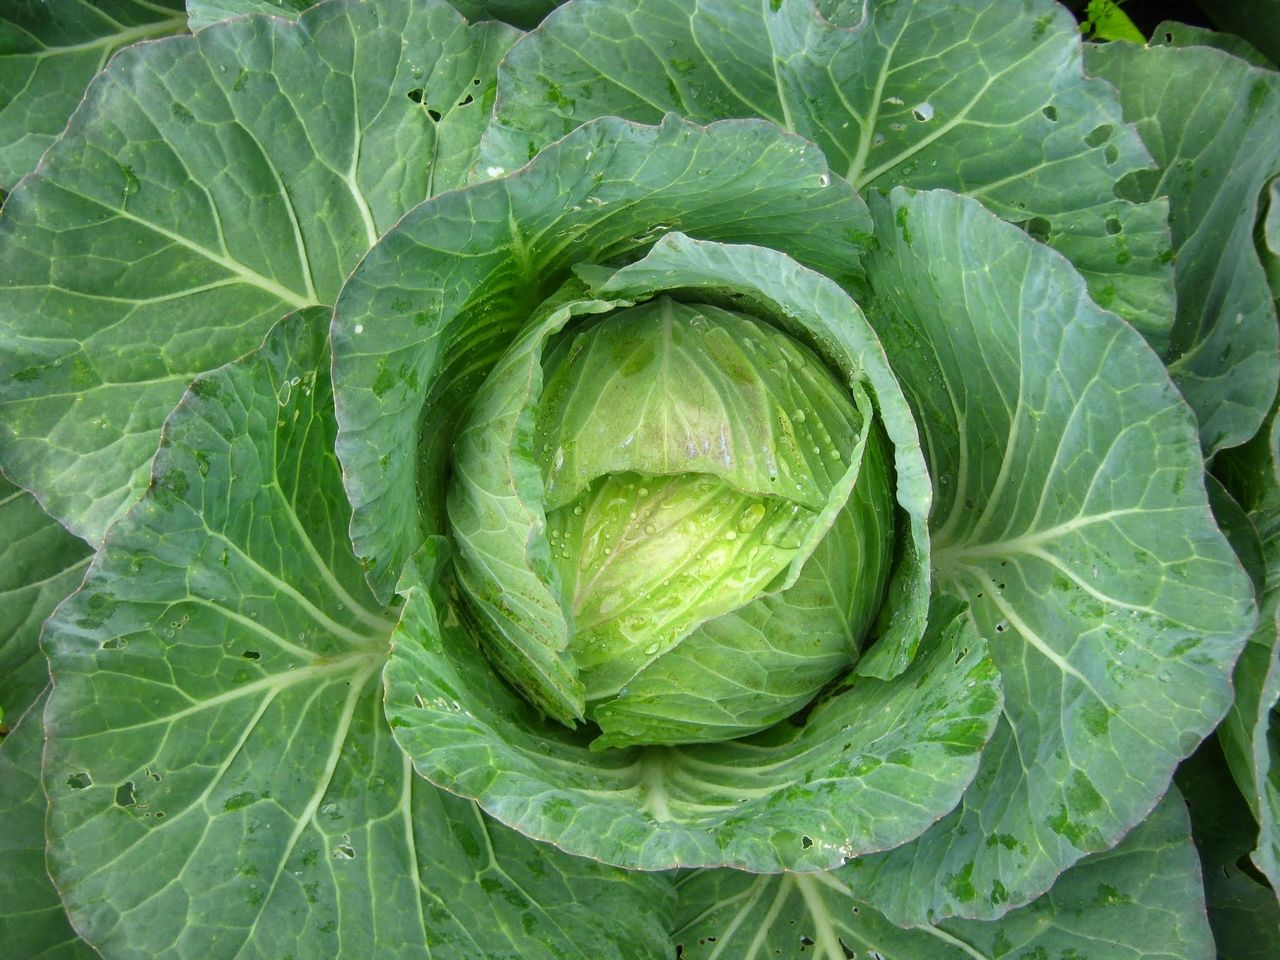 A Natural Remedy: Using Cabbage Leaves during Breastfeeding and